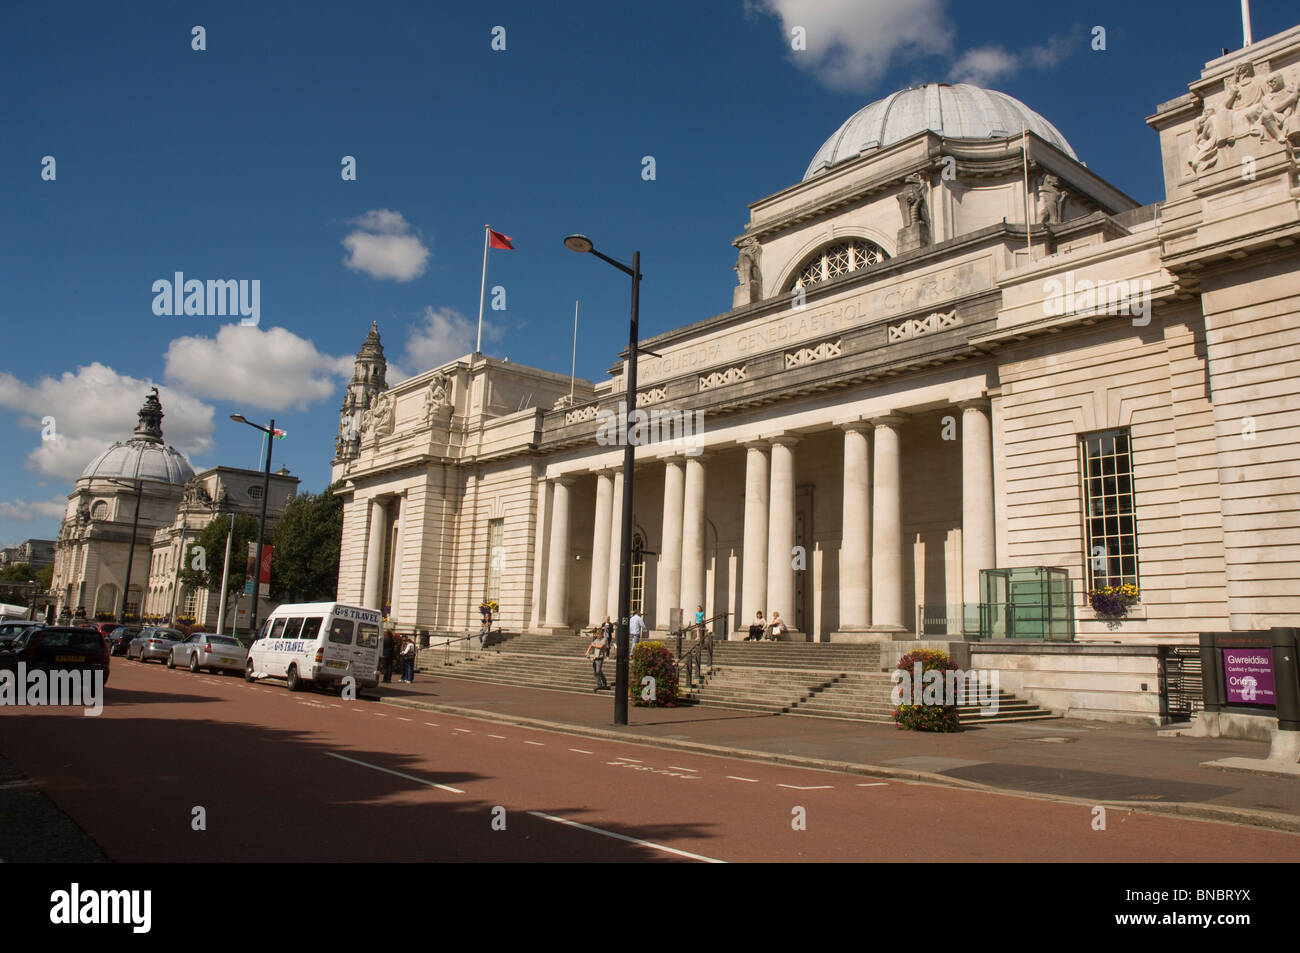 National Museum of Wales, Cardiff, Pays de Galles, Royaume-Uni, Europe Banque D'Images